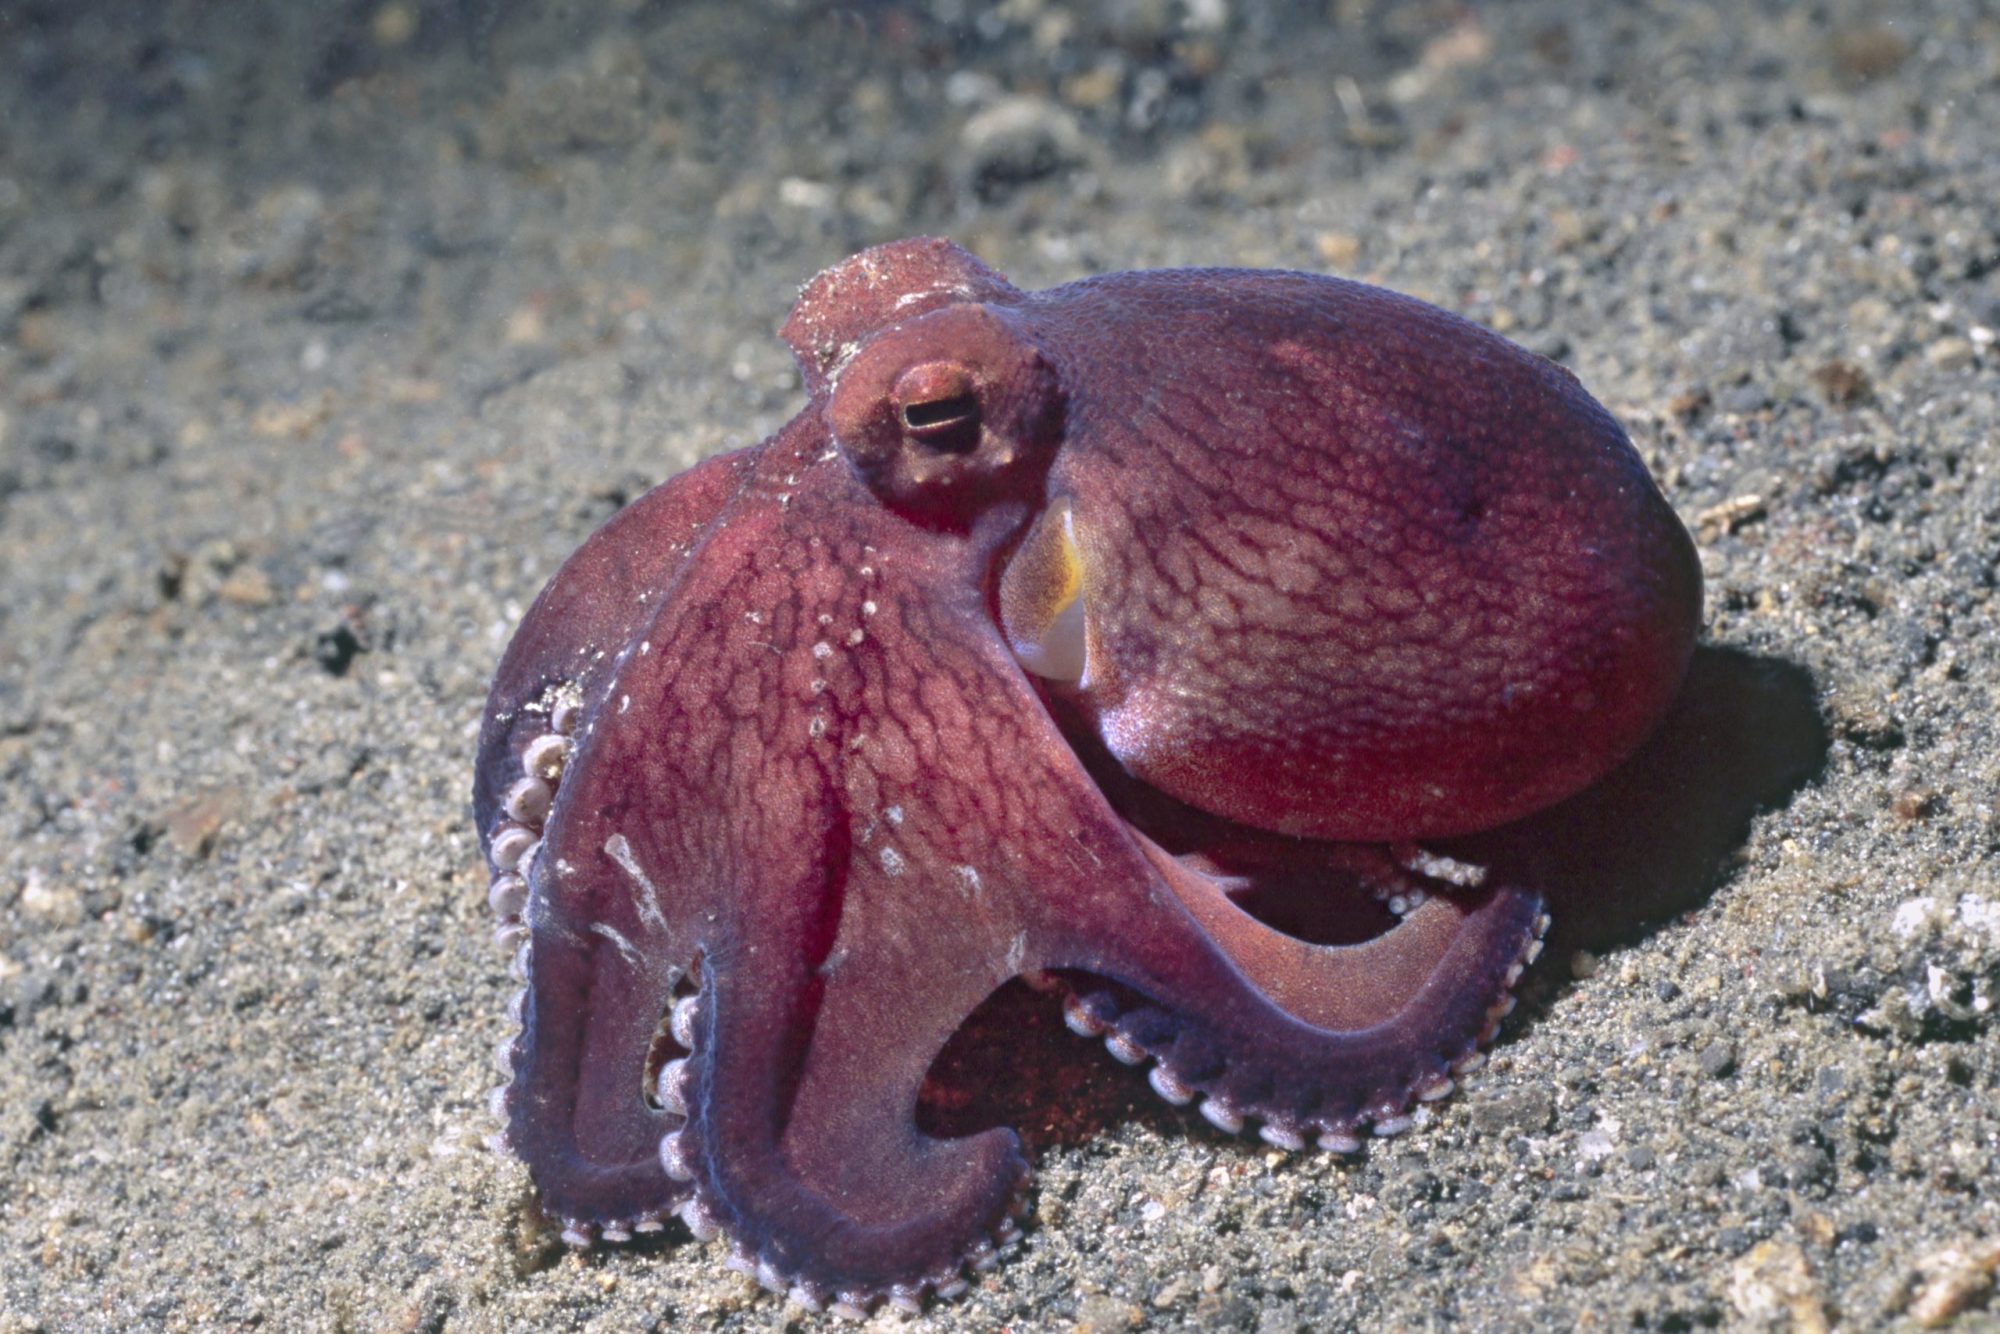 Coconut shell octopus in Lembeh Straits.